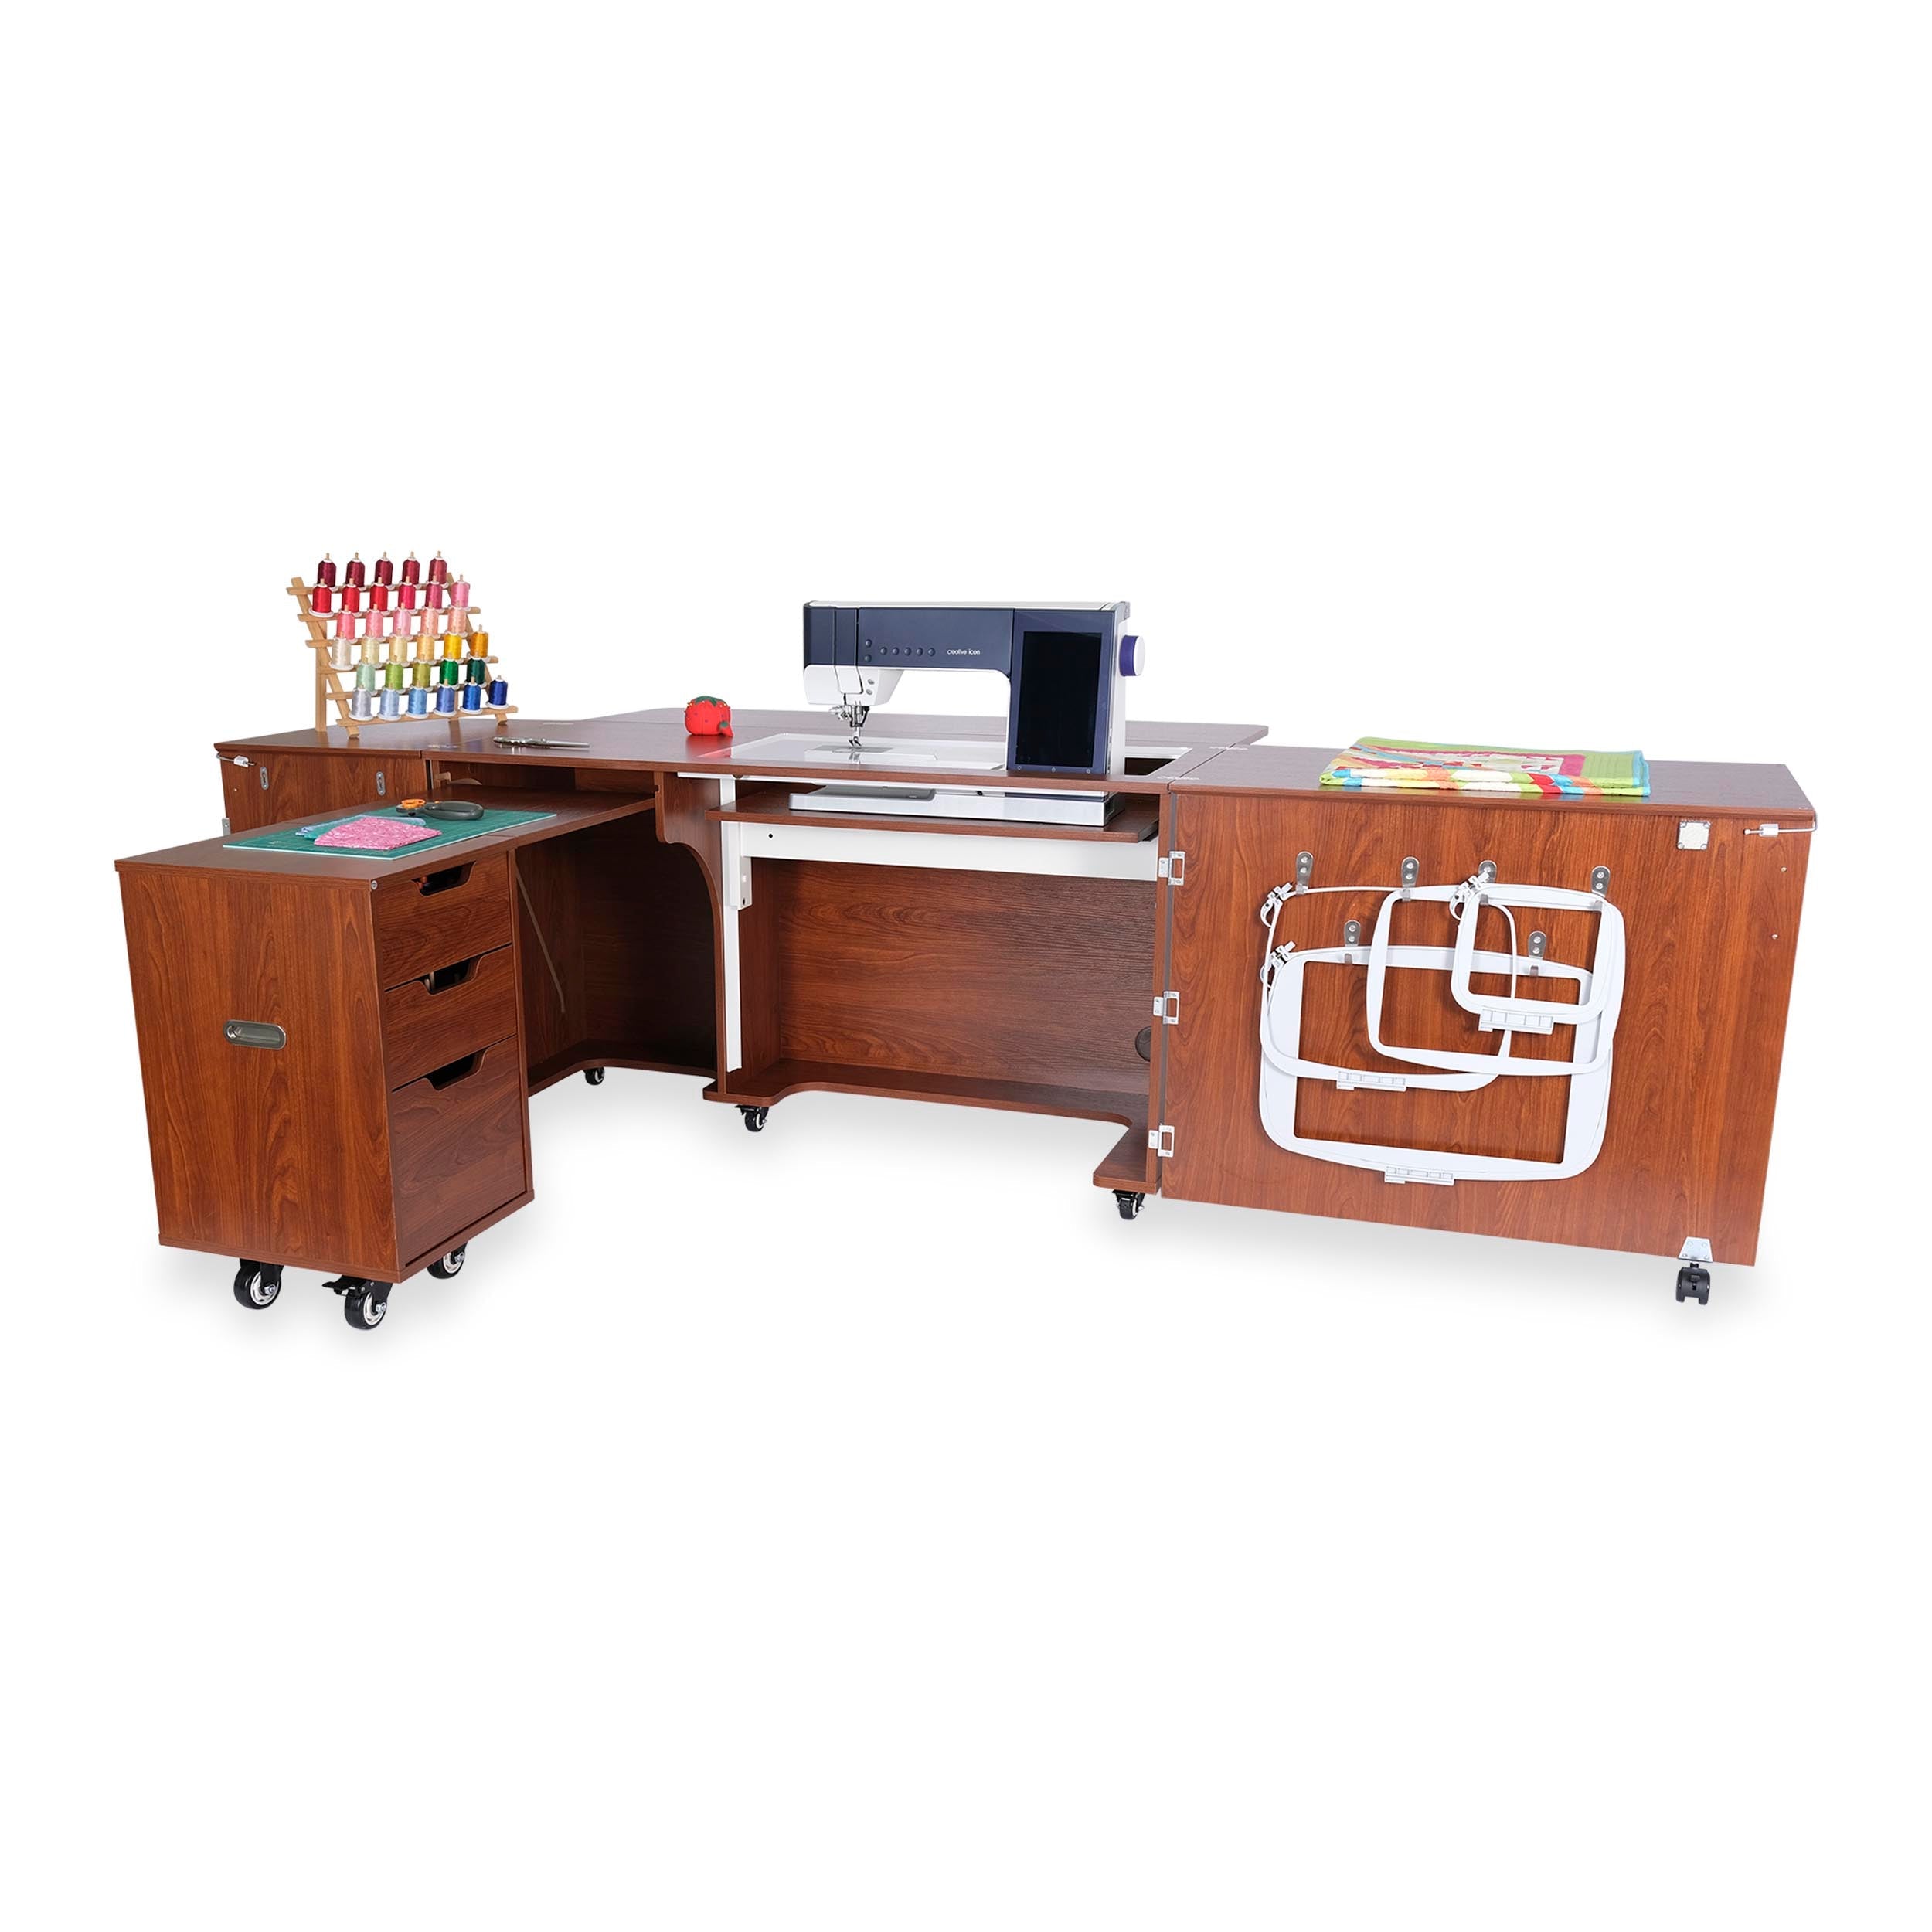 Outback Hydraulic XL Sewing Cabinet Teak-Kangaroo Sewing Furniture-My Favorite Quilt Store